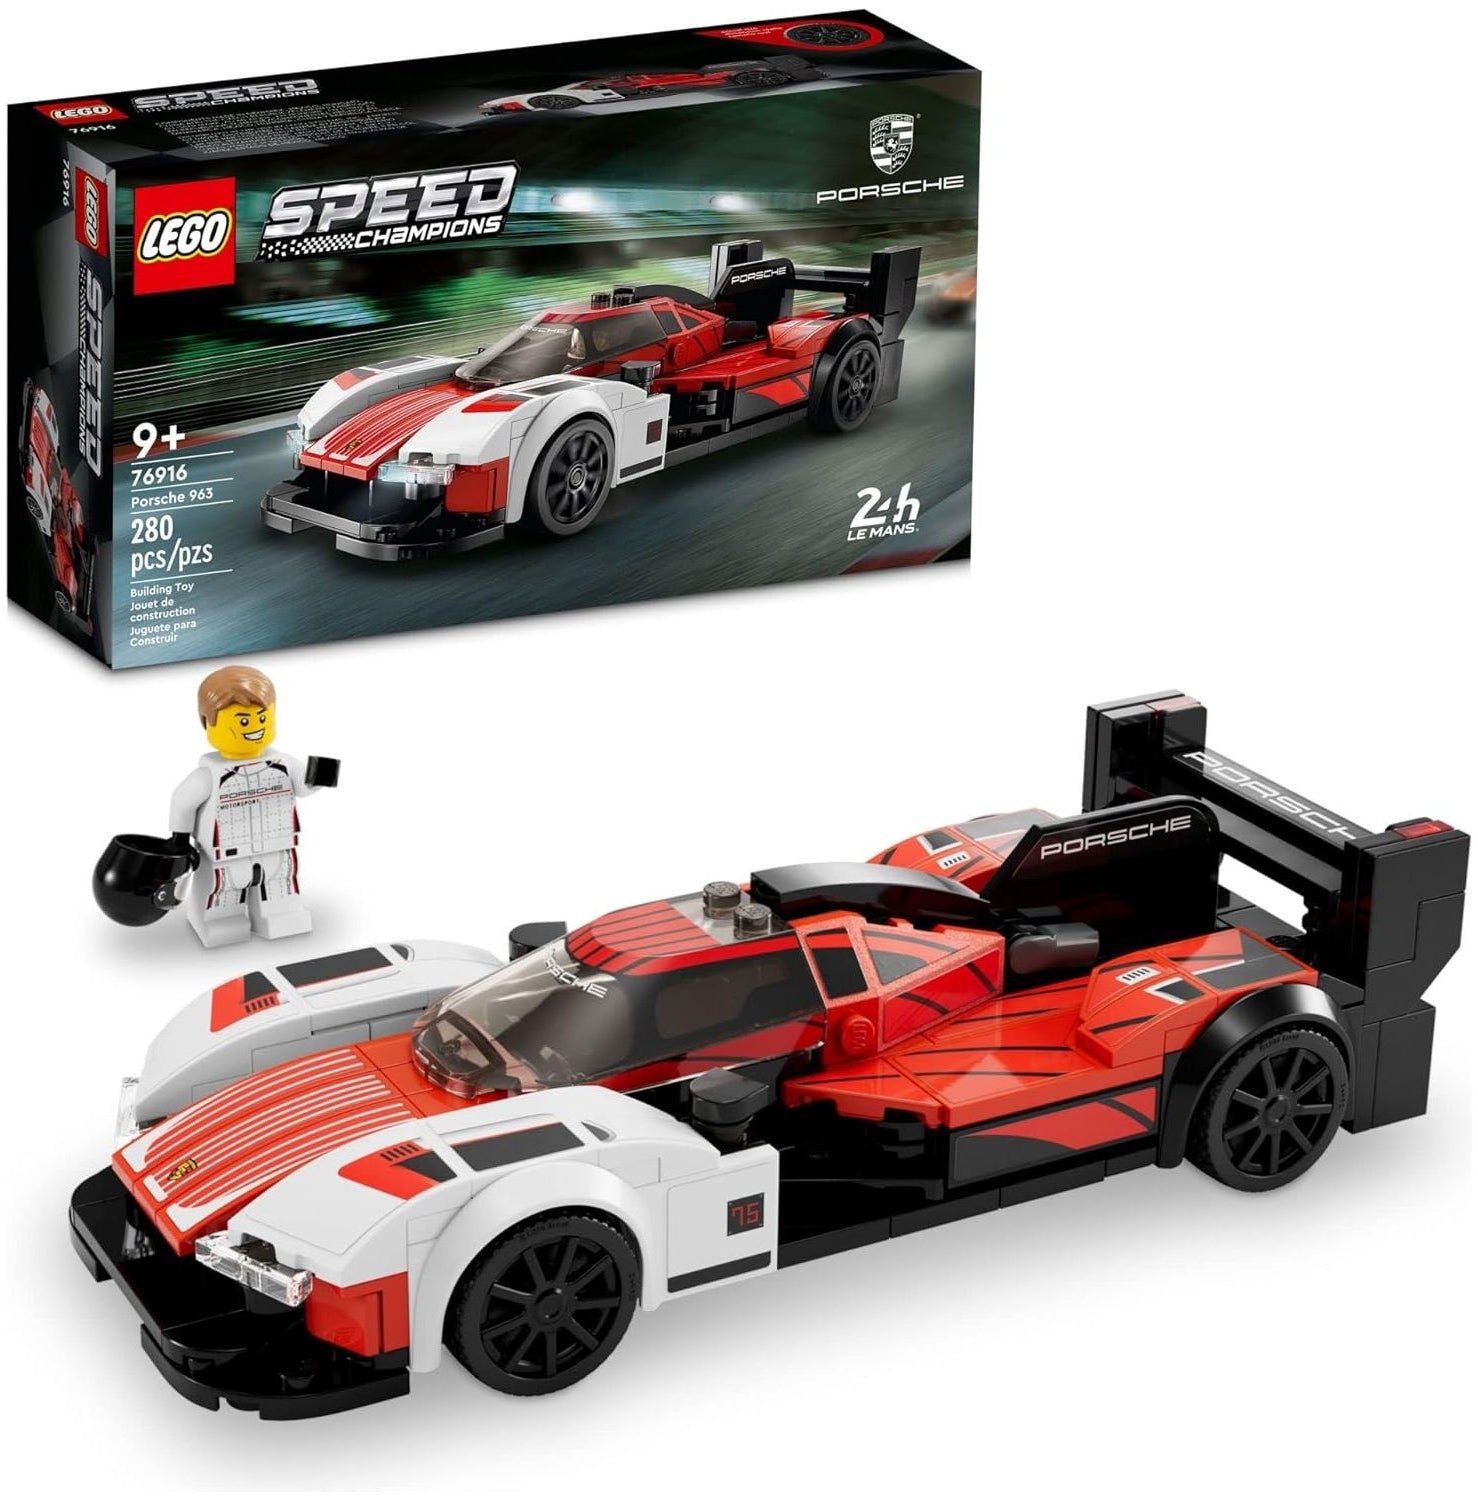 LEGO Speed Champions Porsche 963 76916, Model Car Building Kit, Racing Vehicle Toy for Kids, 2023 Collectible Set with Driver Minifigure